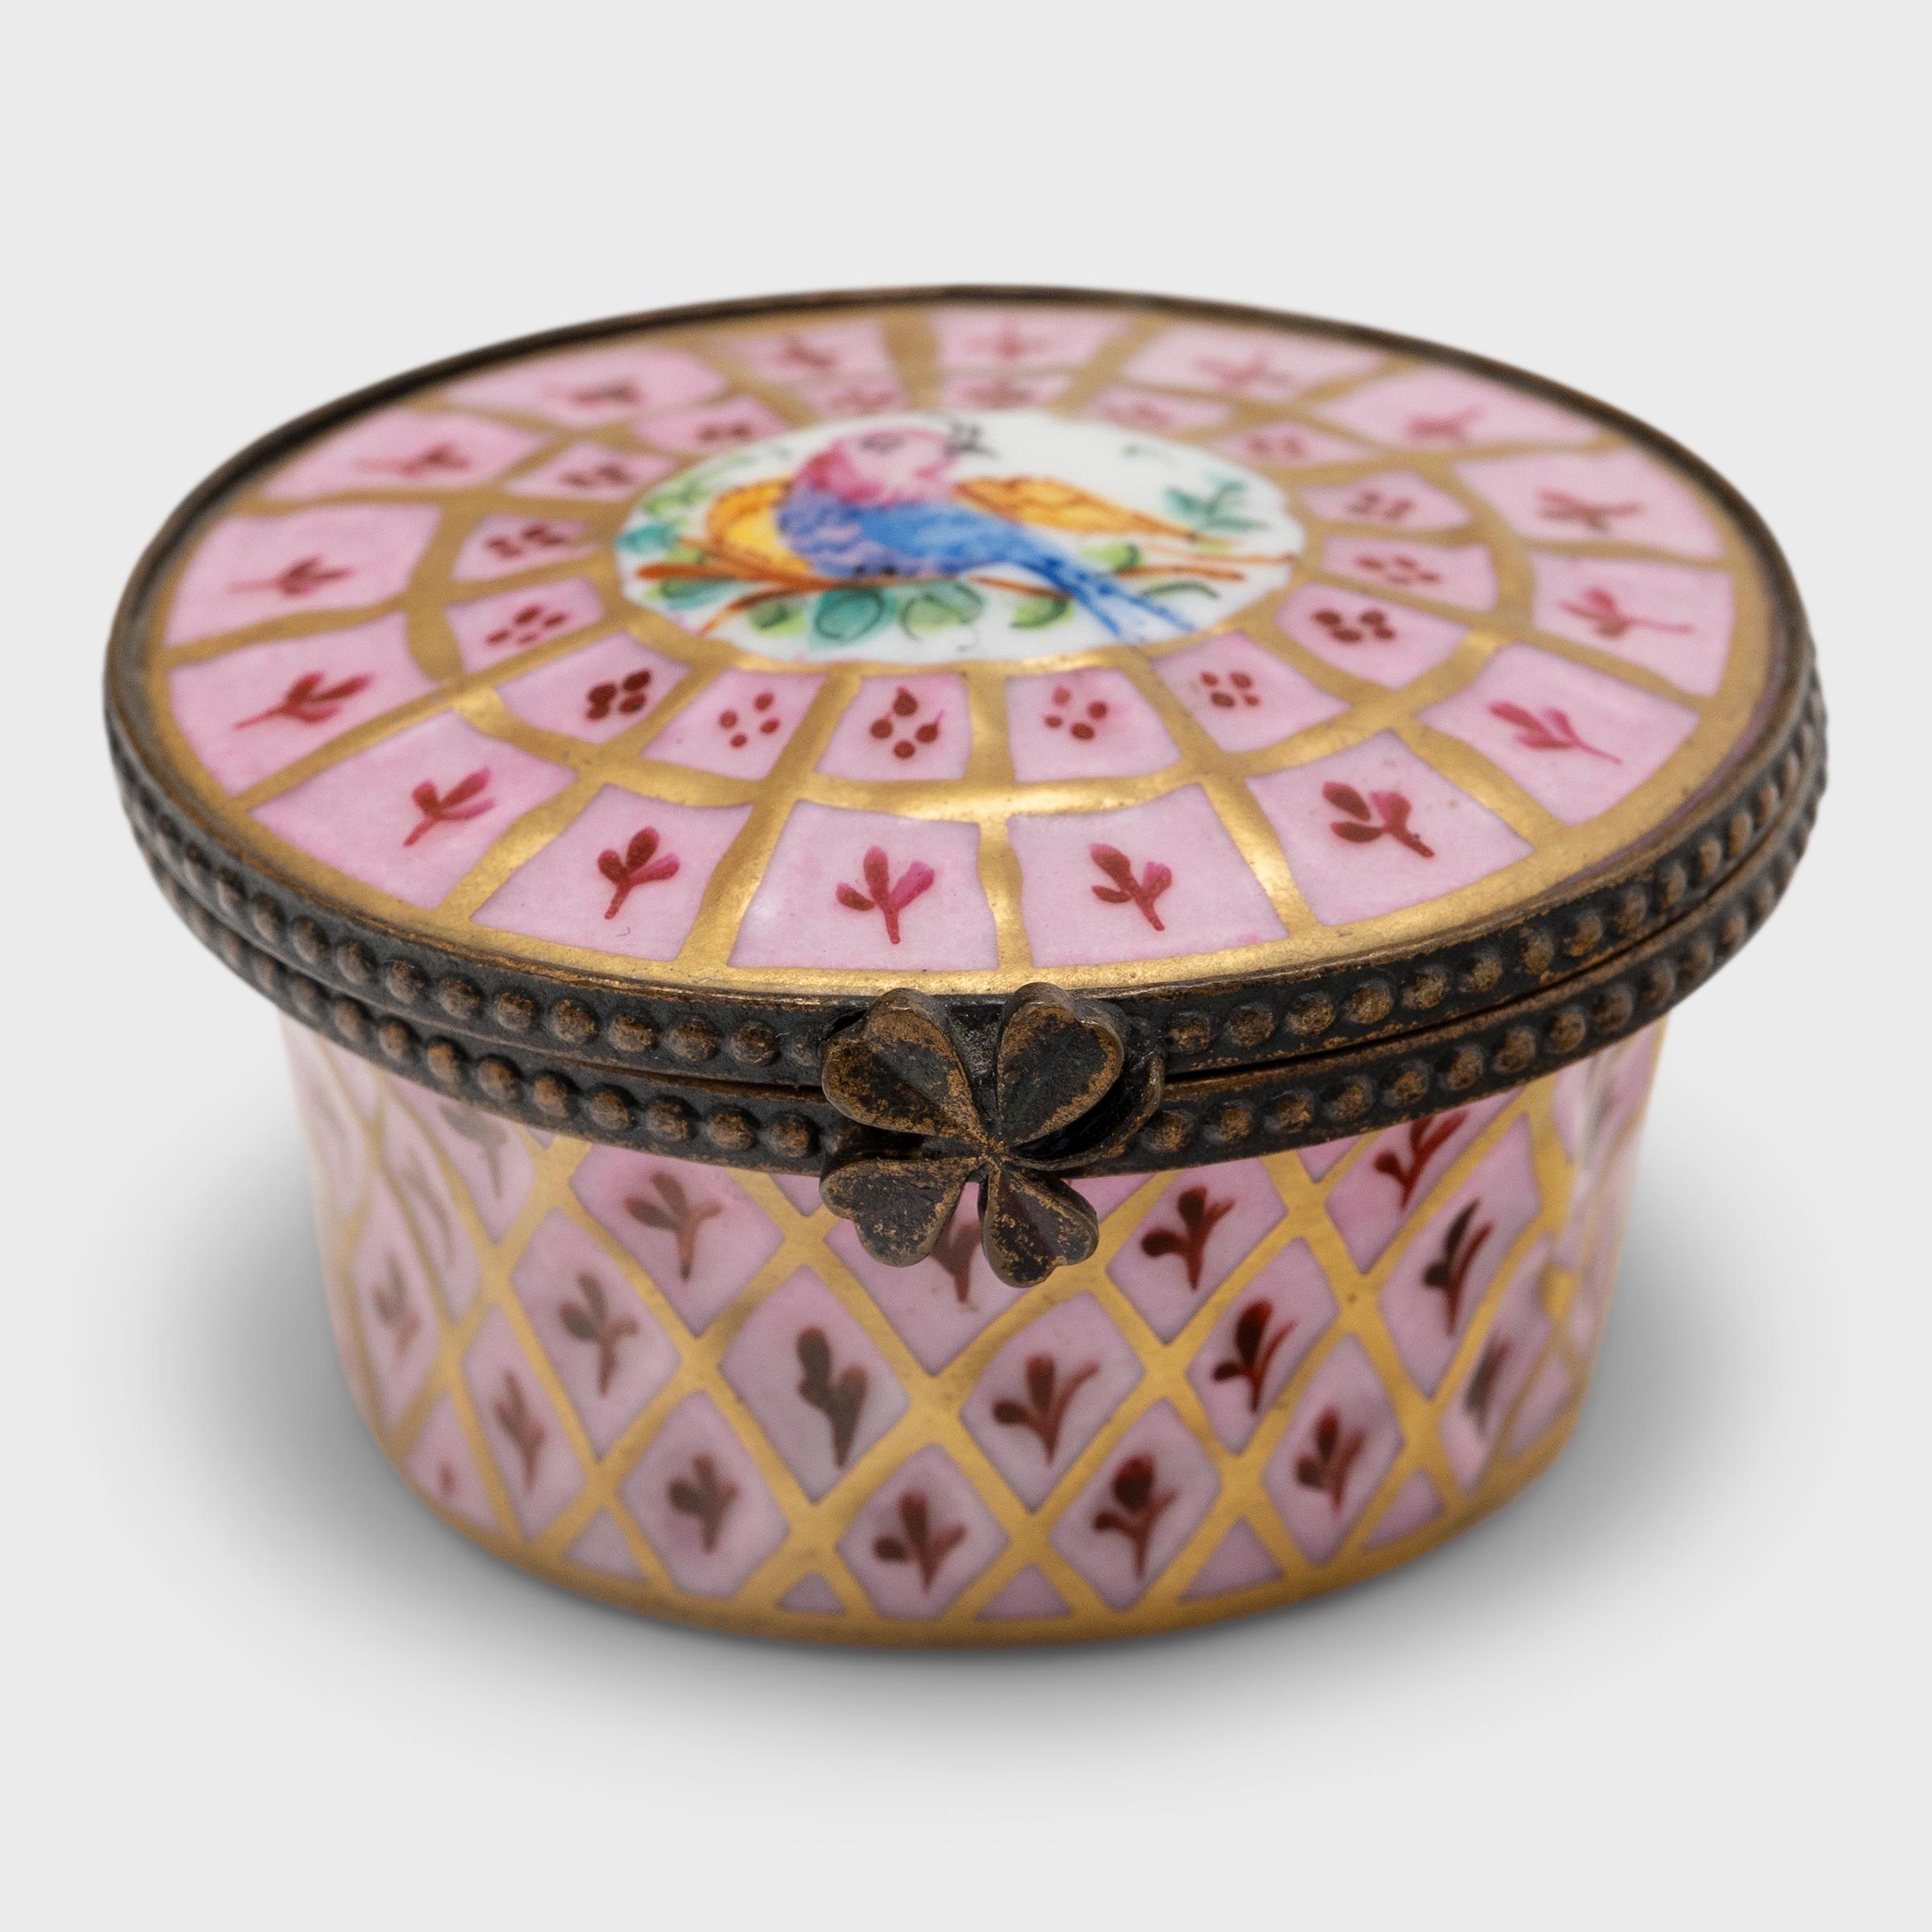 These fanciful porcelain trinket boxes charm with soft color and hand-painted decoration. Drawing on traditions that date back to the 18th century, these compact trinket boxes are in the style of traditional Limoges porcelain. Limoges porcelain